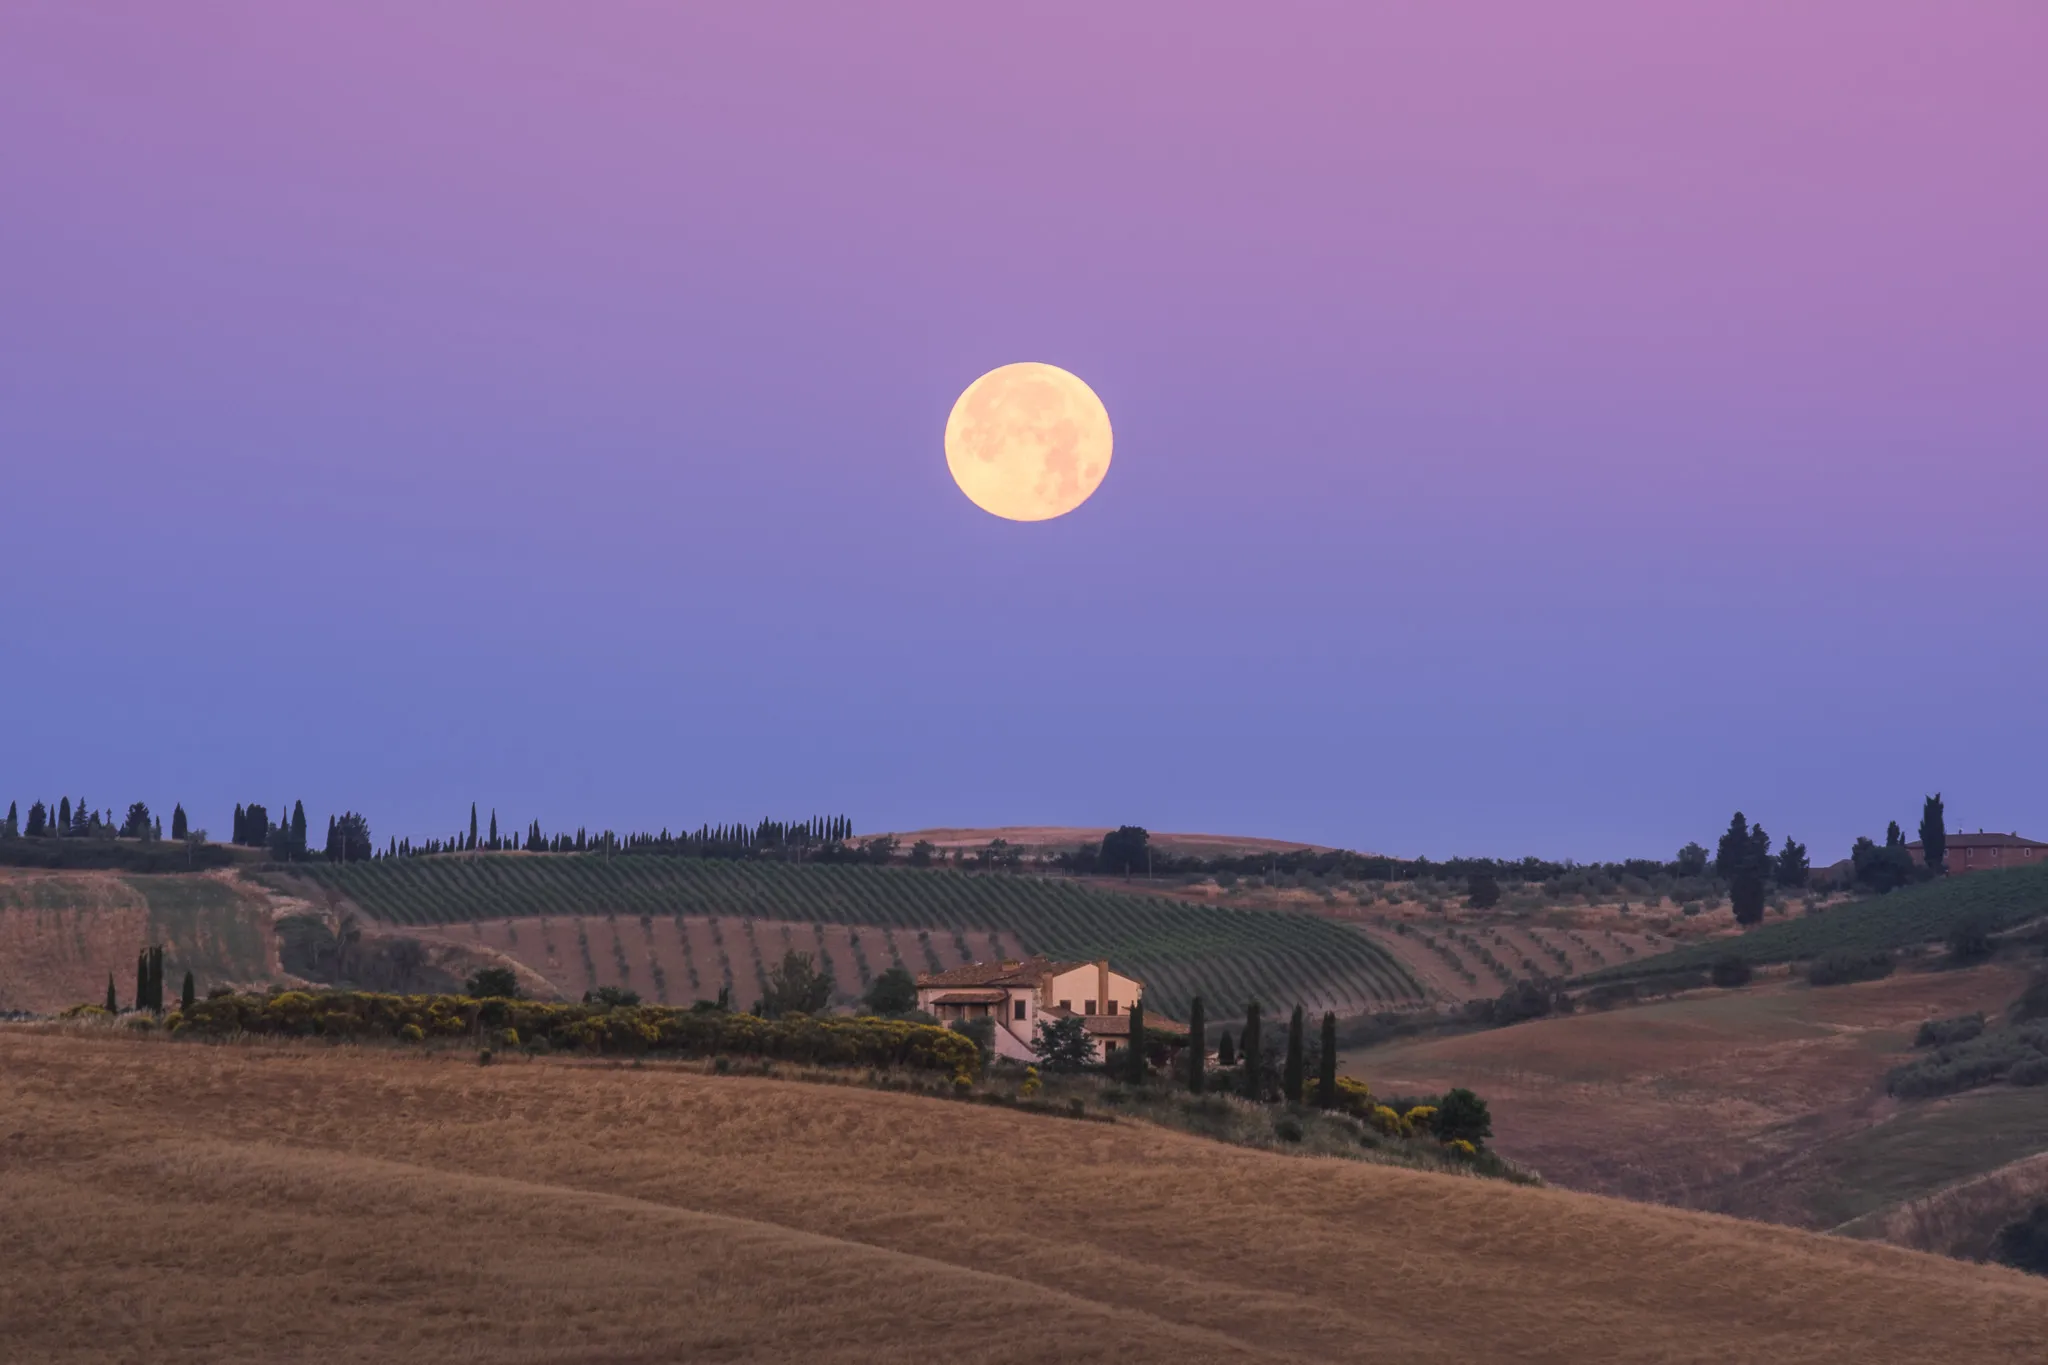 Full moon above a Tuscan landscape